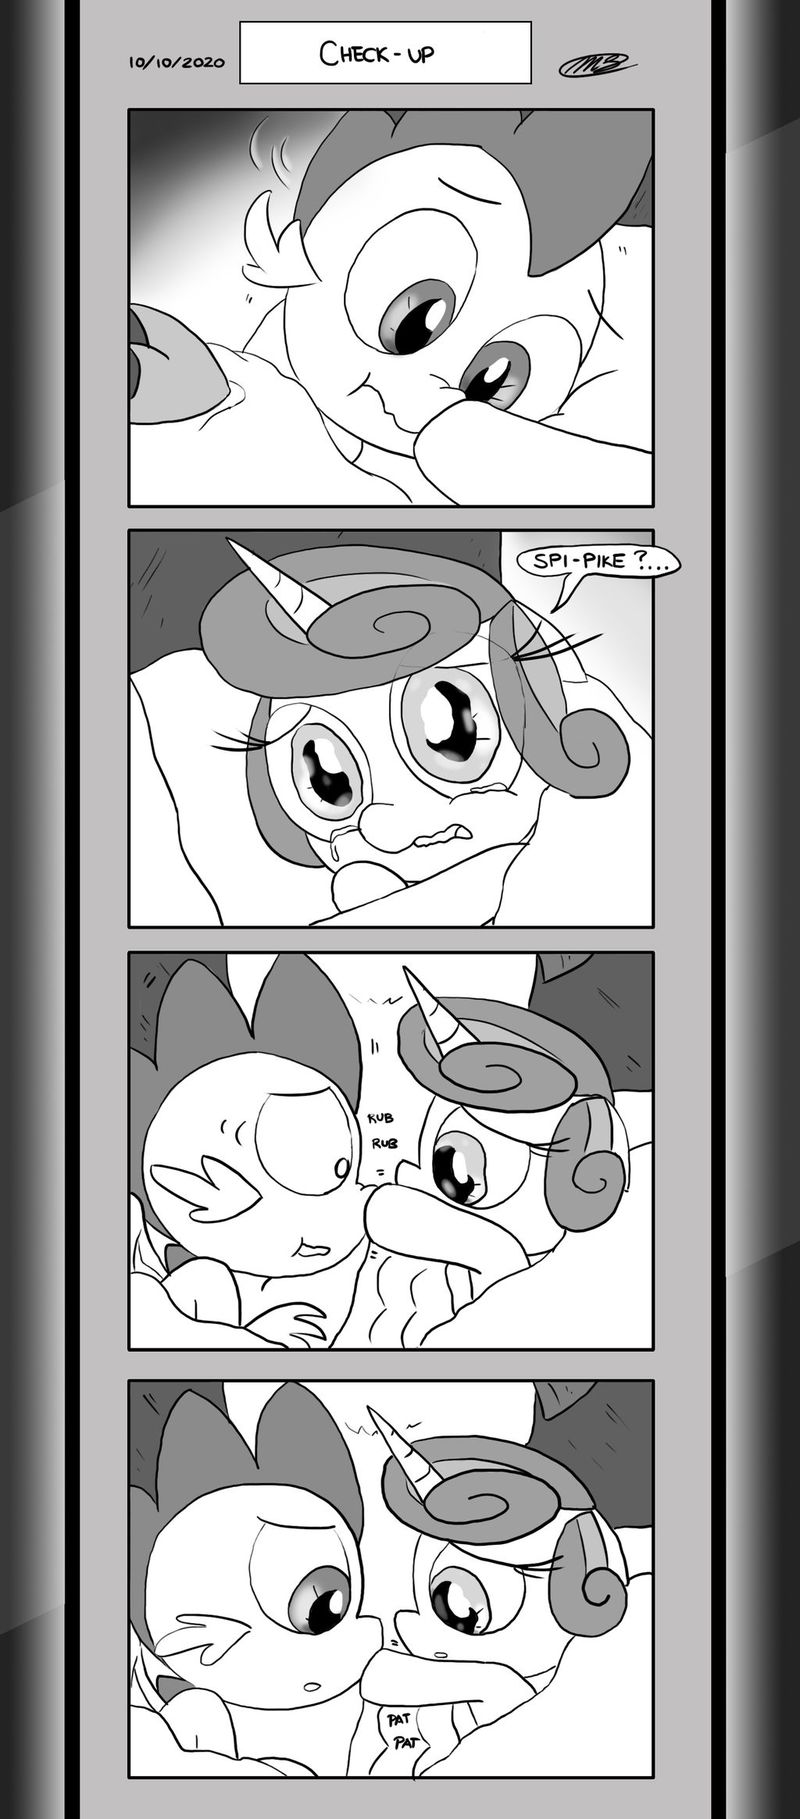 Page 3: Check-Up